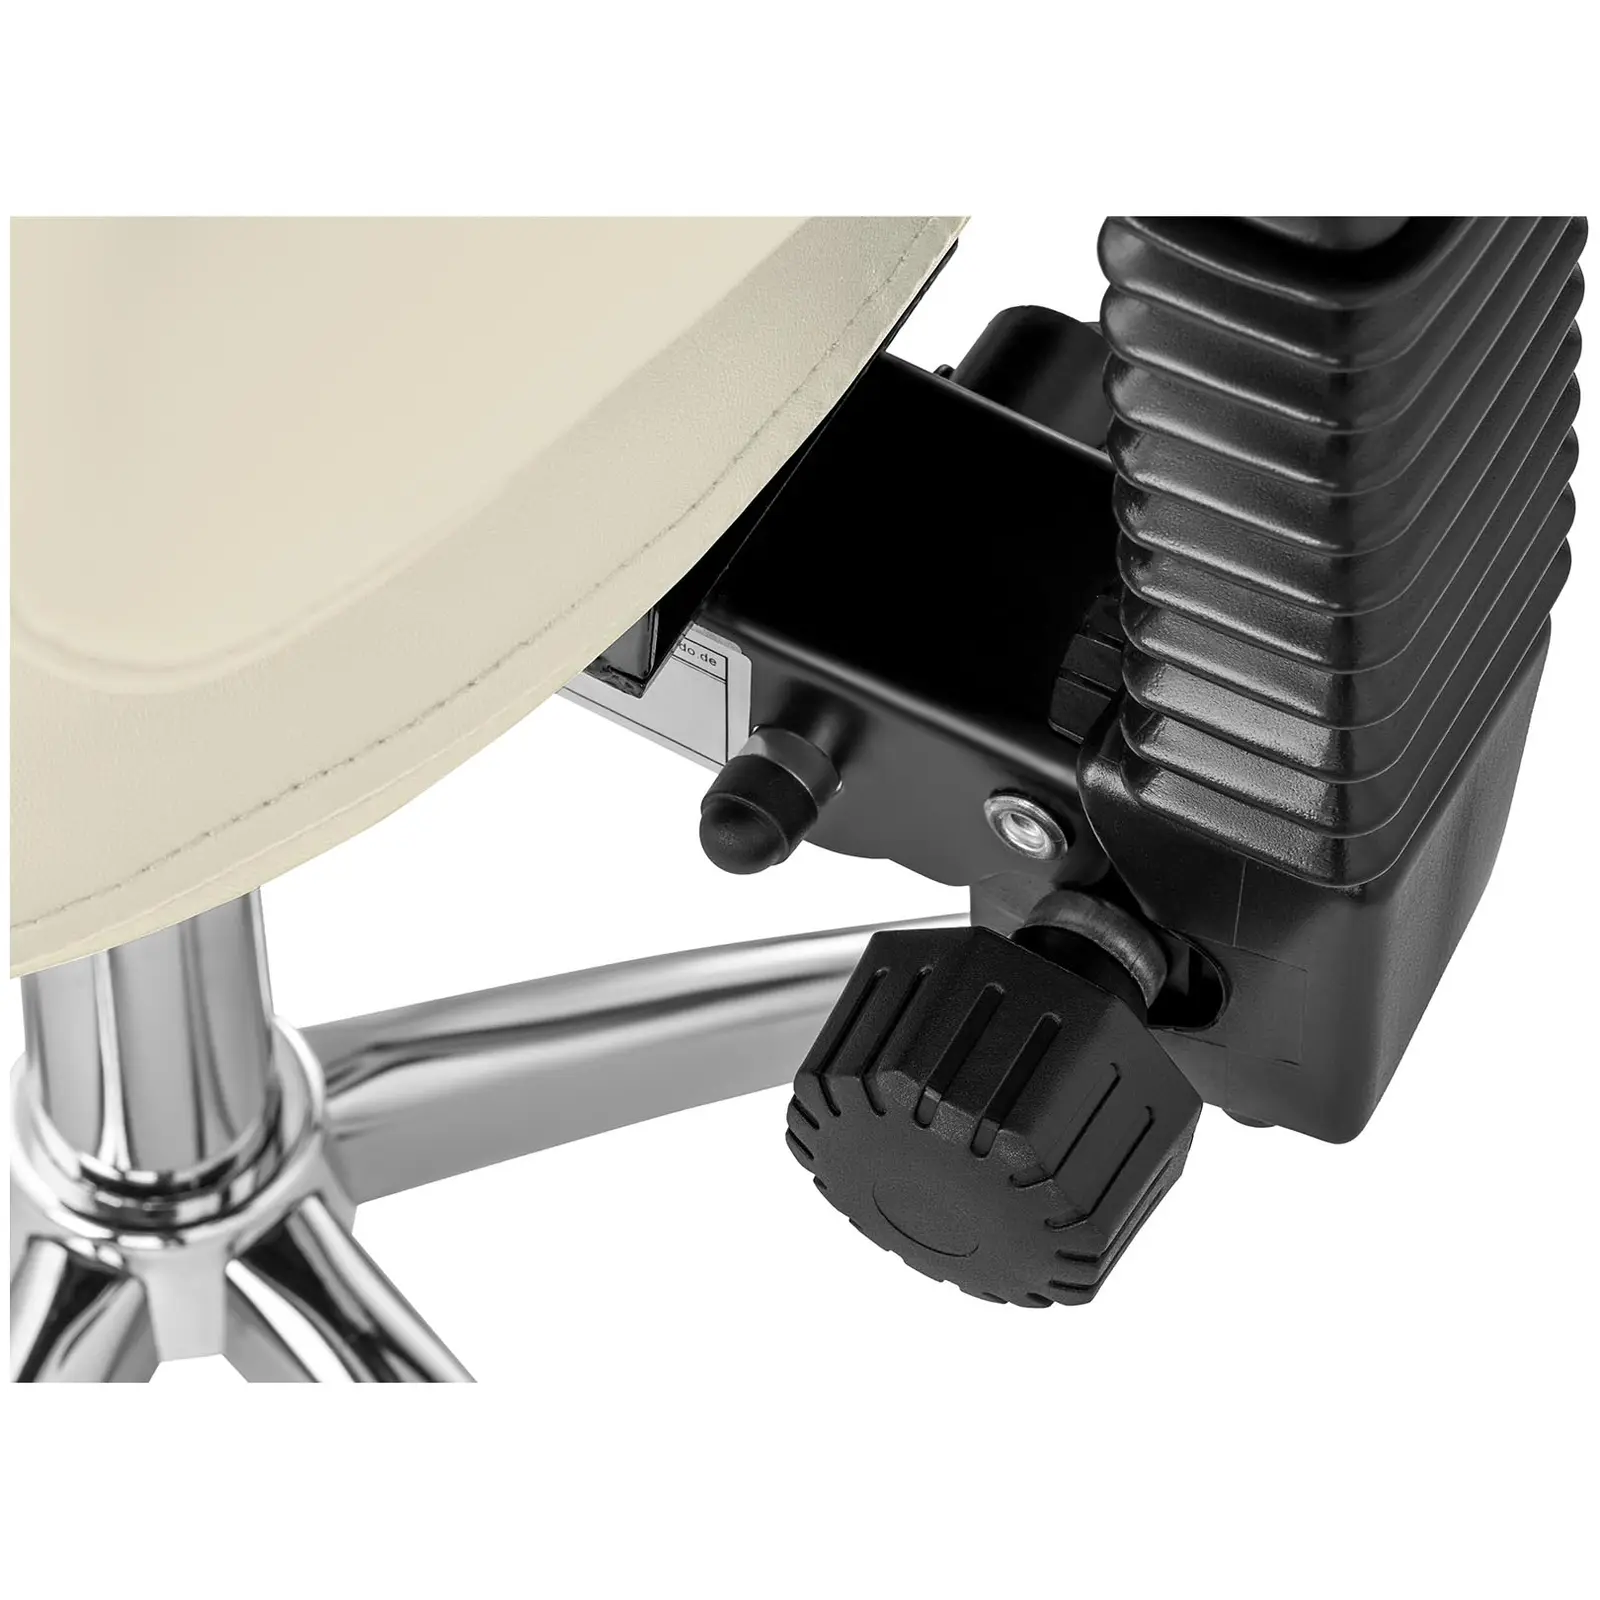 Saddle Chair with Back Support - 550-690 mm - 150 kg - Beige